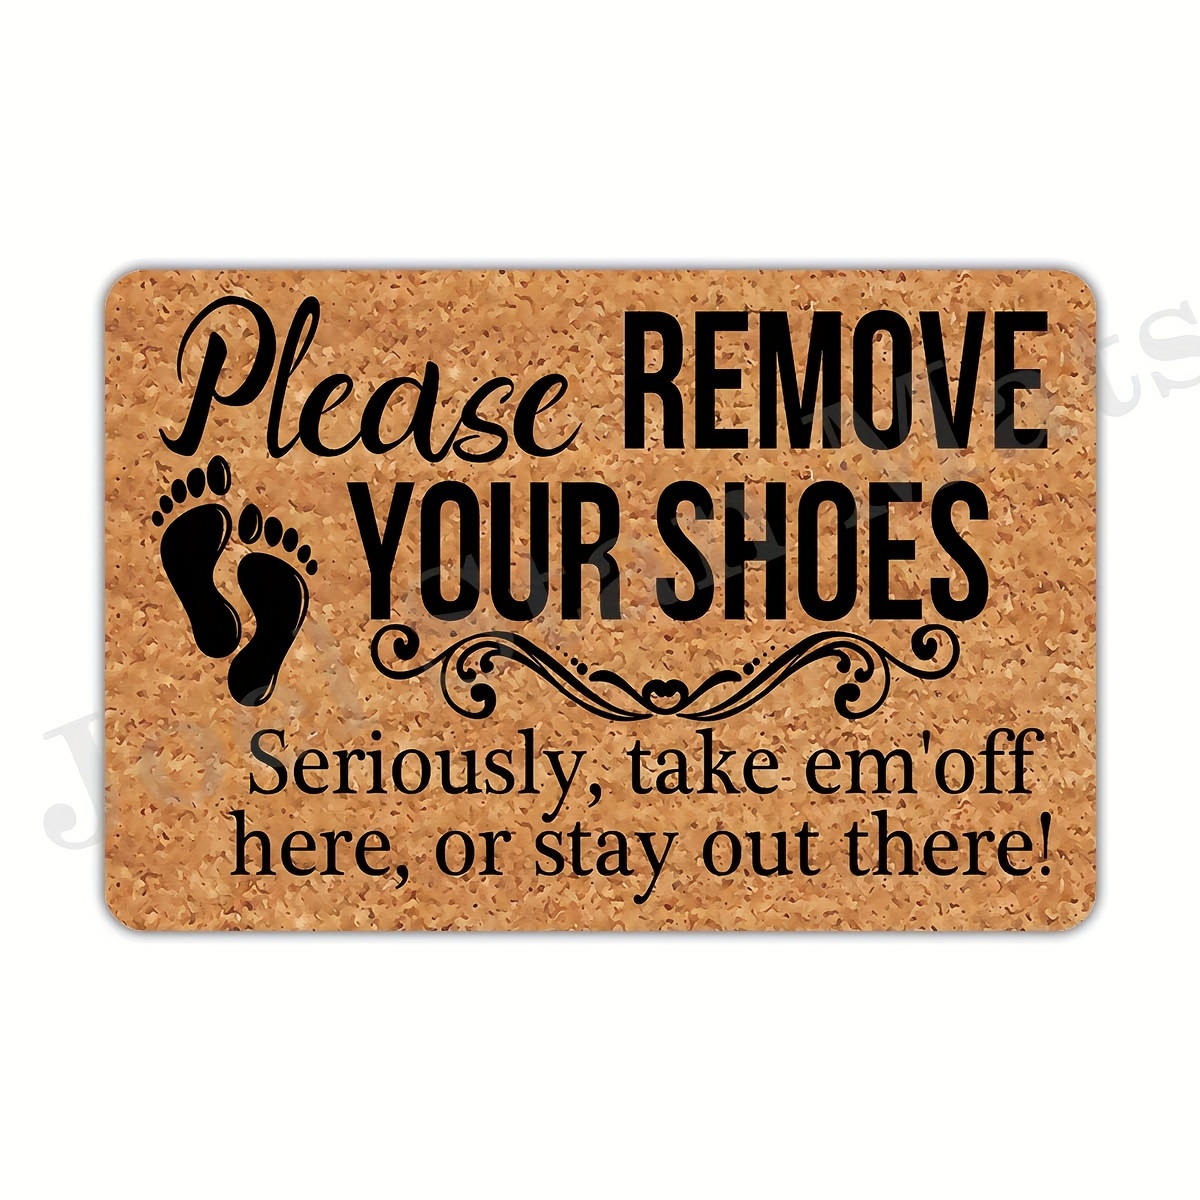 

Please Remove Your Shoes Seriously Take Em'off Here Or Stay Out There Entrance Non-slip Indoor Rubber Door Mats For Front Door/ Bathroom/garden/kitchen/ Bedroom 23.6"x 15.7